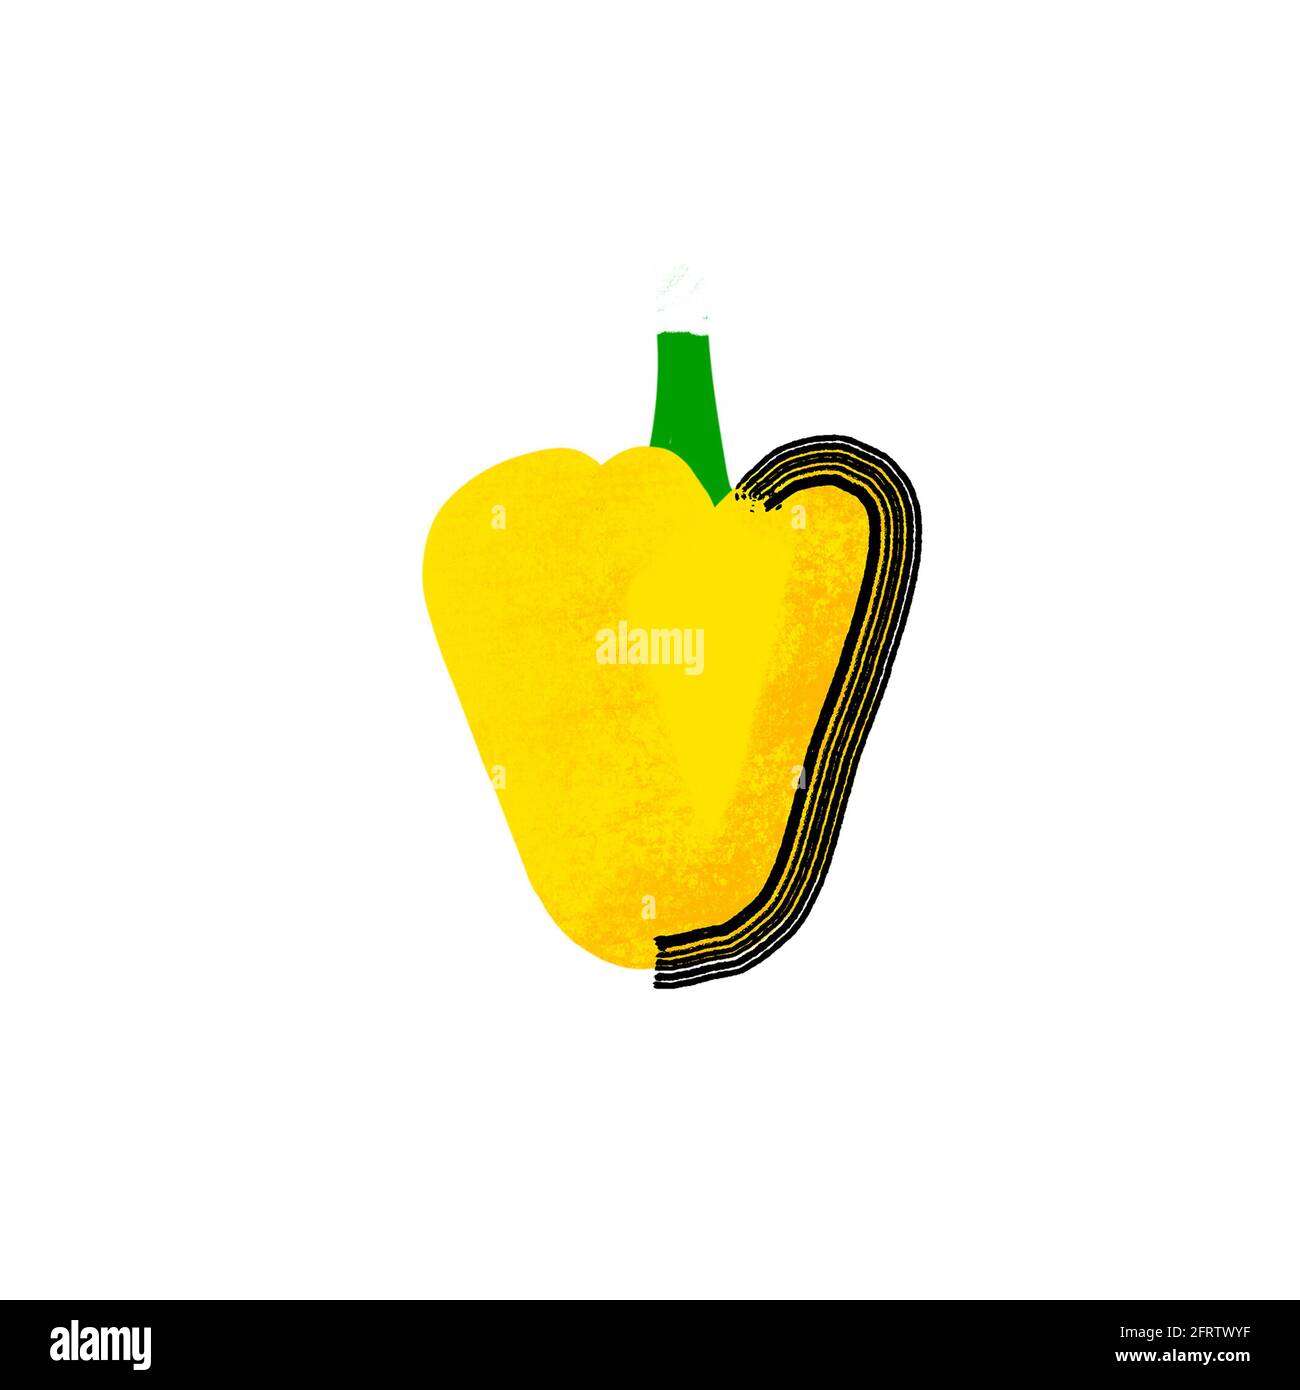 Stylized yellow bell pepper illustration on white Stock Photo